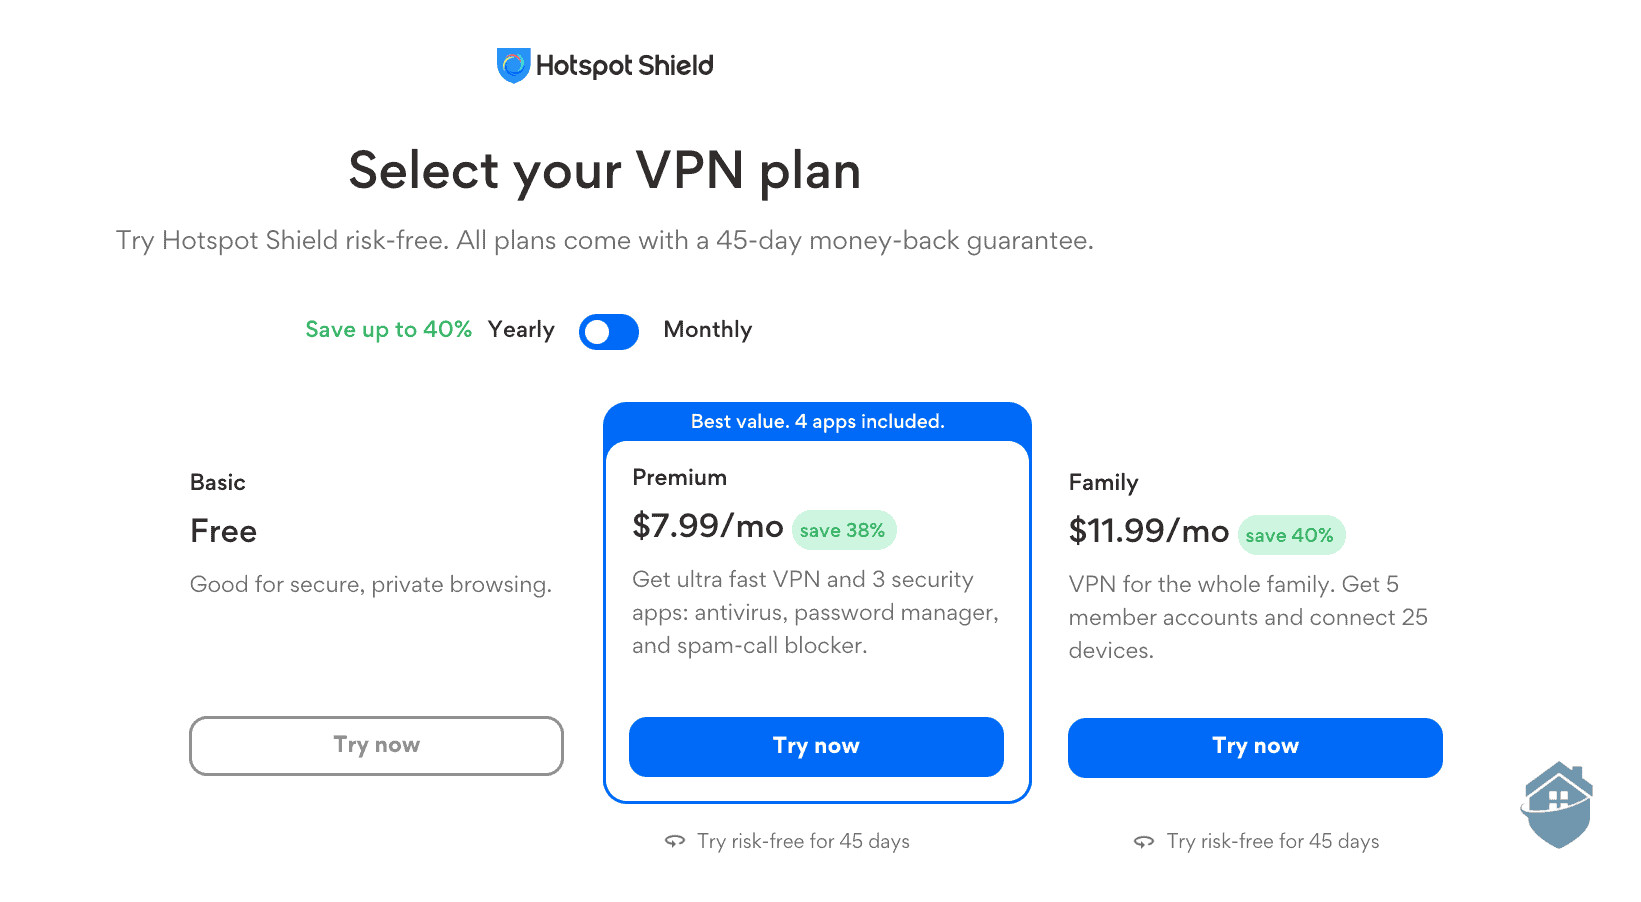 Hotspot Shield has a free, premium and family plan